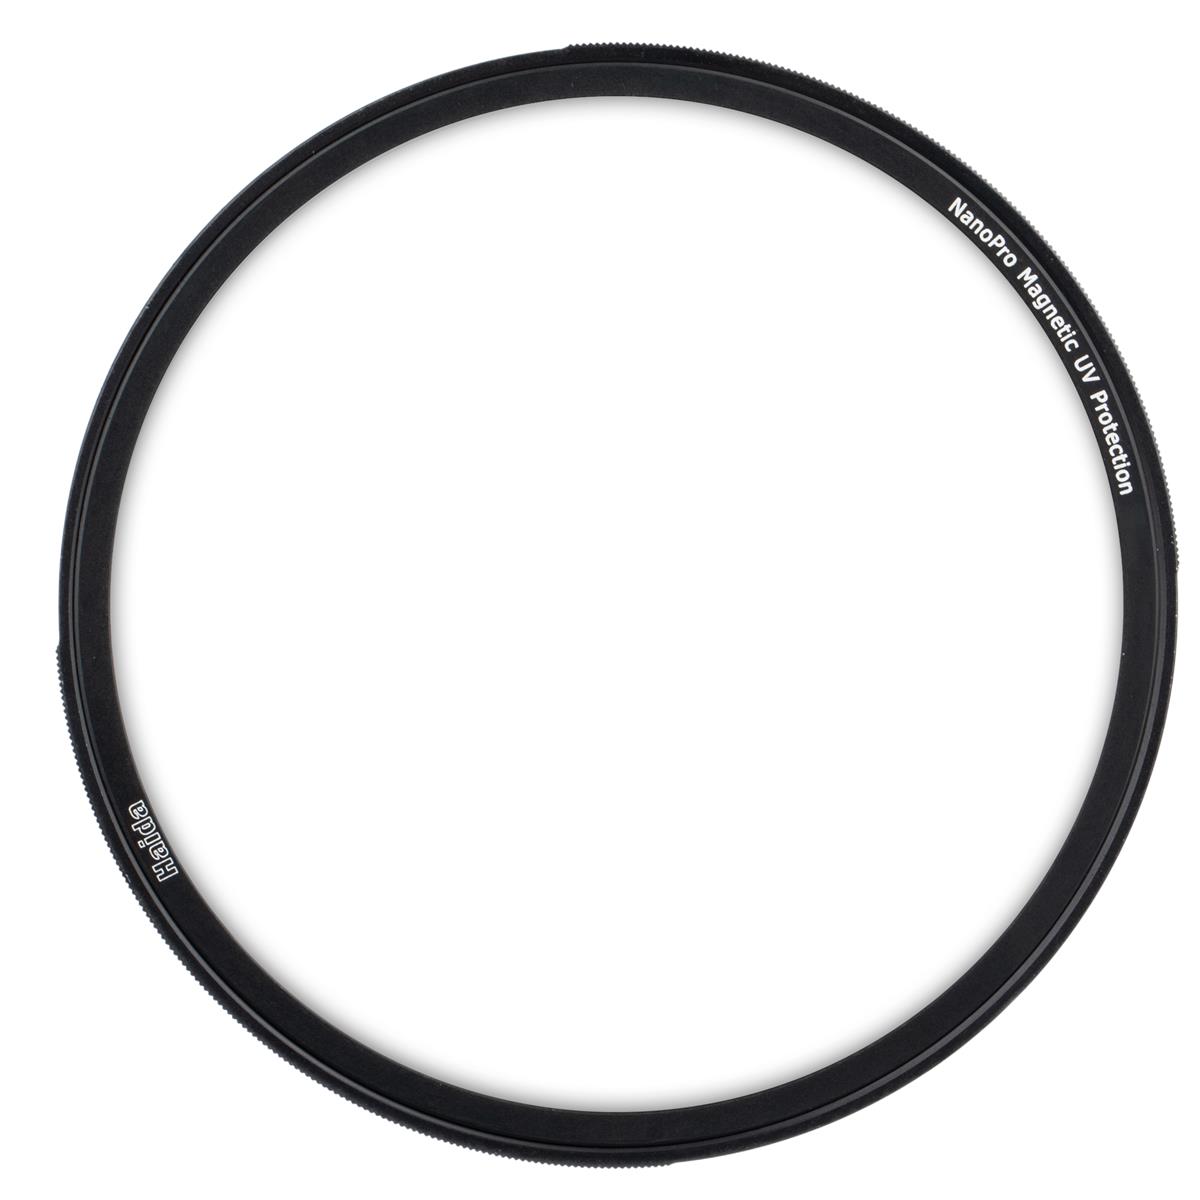 kase 77mm 82mm magnetic adapter ring convert thread filter to magnetic filter Haida 82mm Haida NanoPro Magnetic UV Protection Filter with Adapter Ring